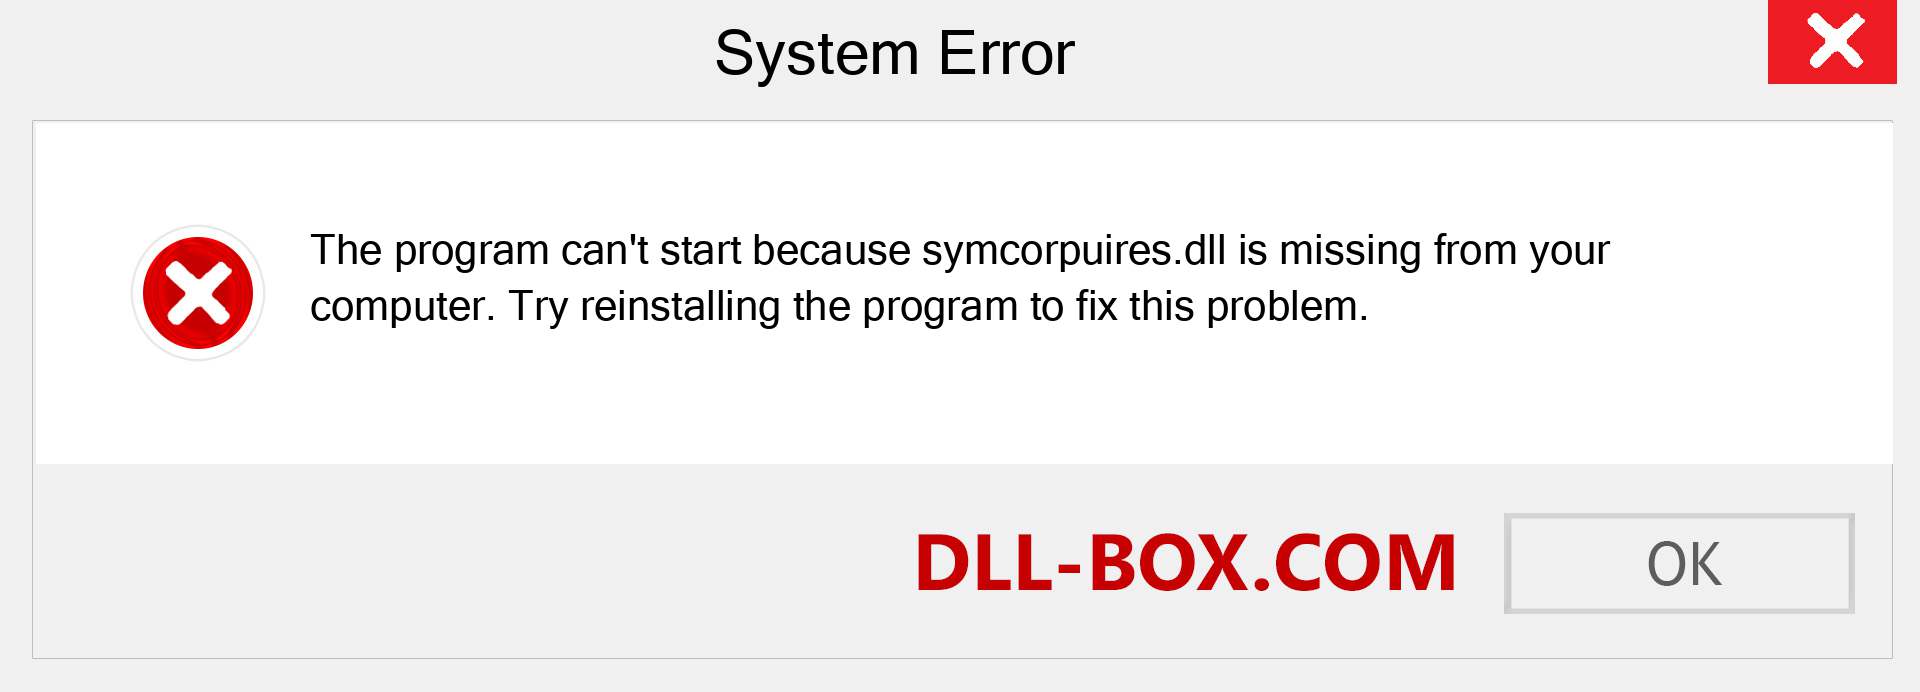  symcorpuires.dll file is missing?. Download for Windows 7, 8, 10 - Fix  symcorpuires dll Missing Error on Windows, photos, images